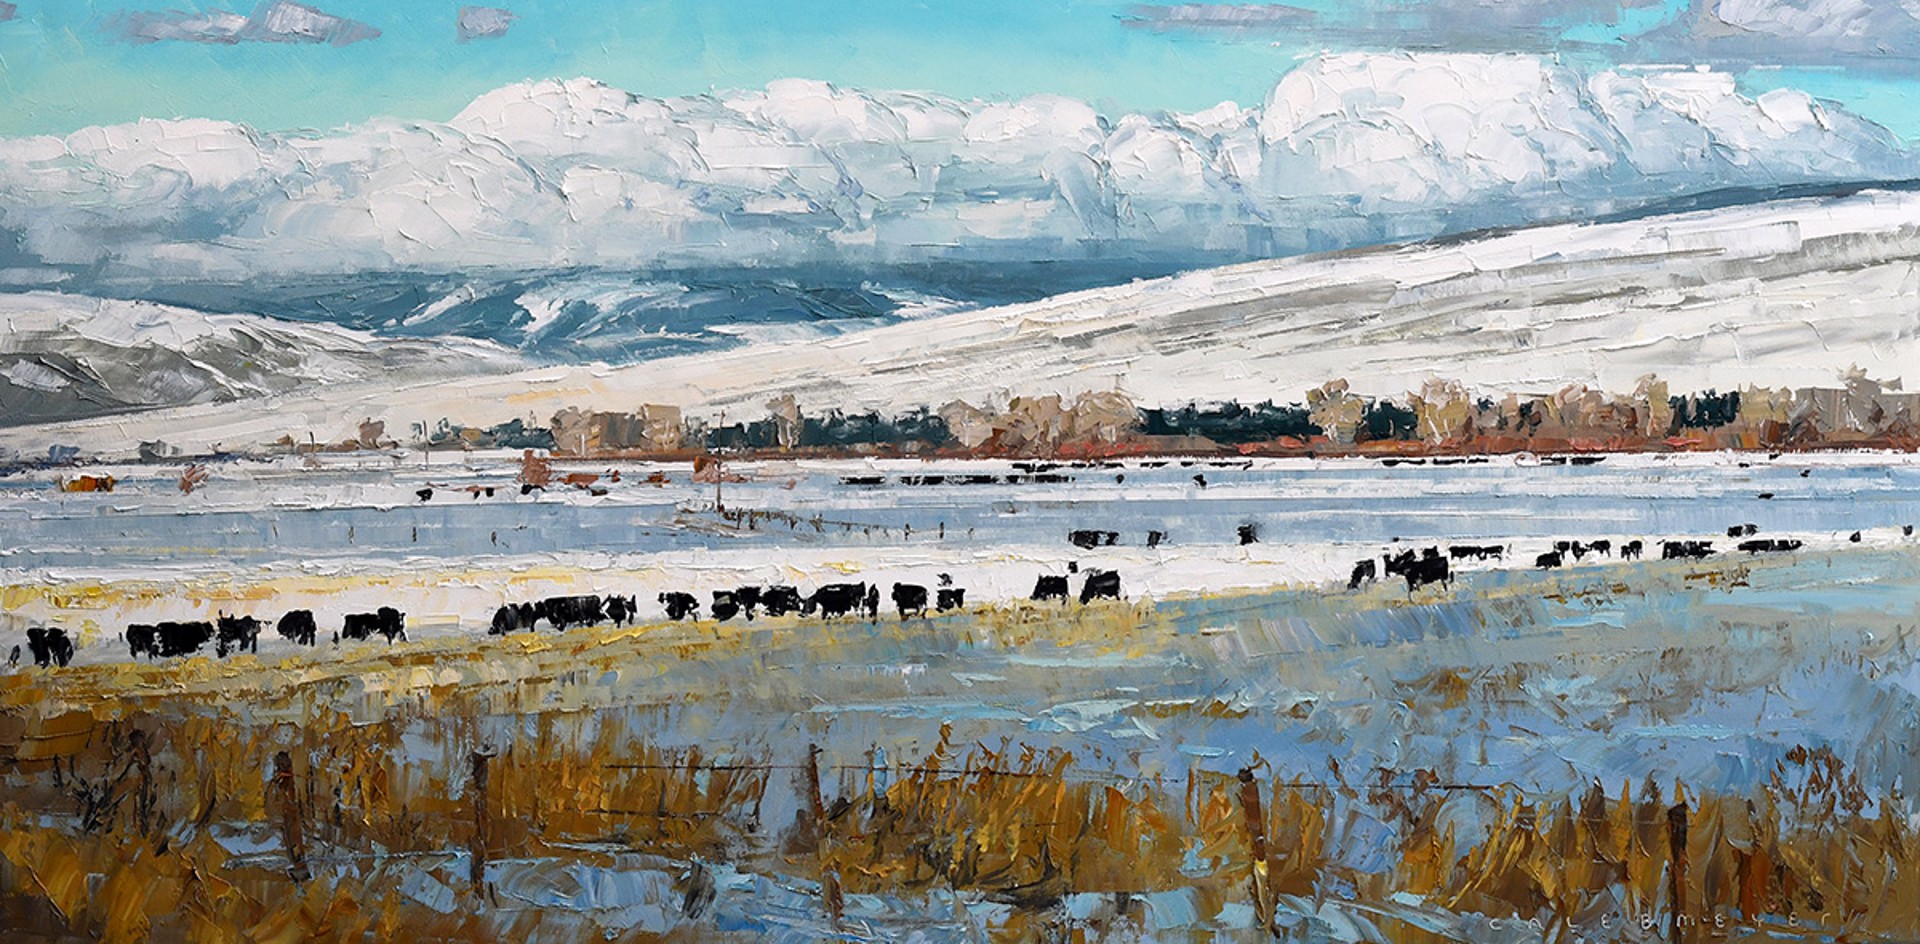 Original Oil Landscape Painting In Thick Palette Knife Brushstrokes By Caleb Meyer Featuring Black Cows Scattered Across A Snowy Landscape Of The Plains With Mountains In The Distance And Big White Clouds 